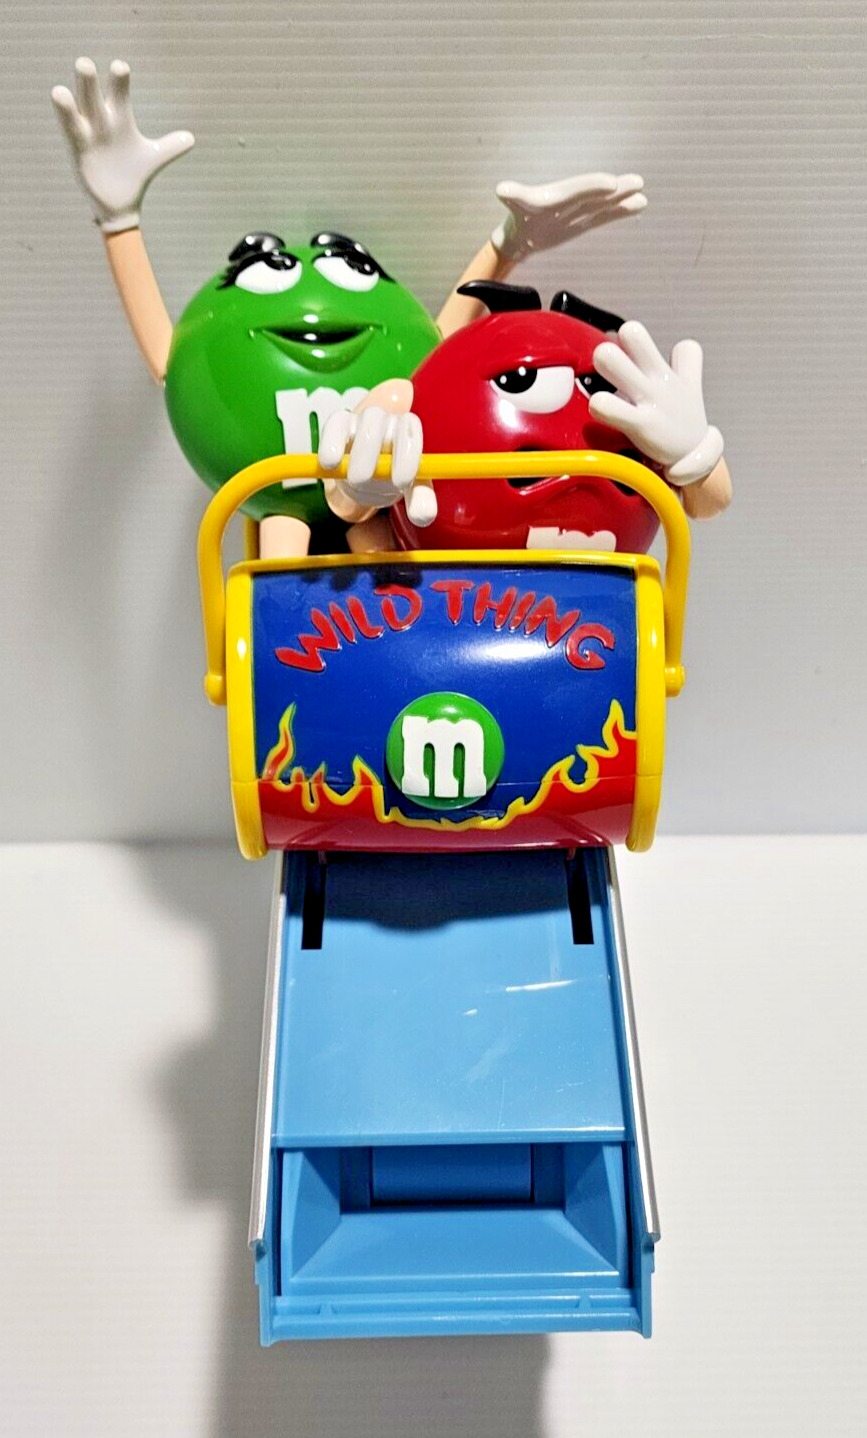 M&M's Wild Thing Roller Coaster Candy Dispenser Vintage 1991 Toy Figure RARE